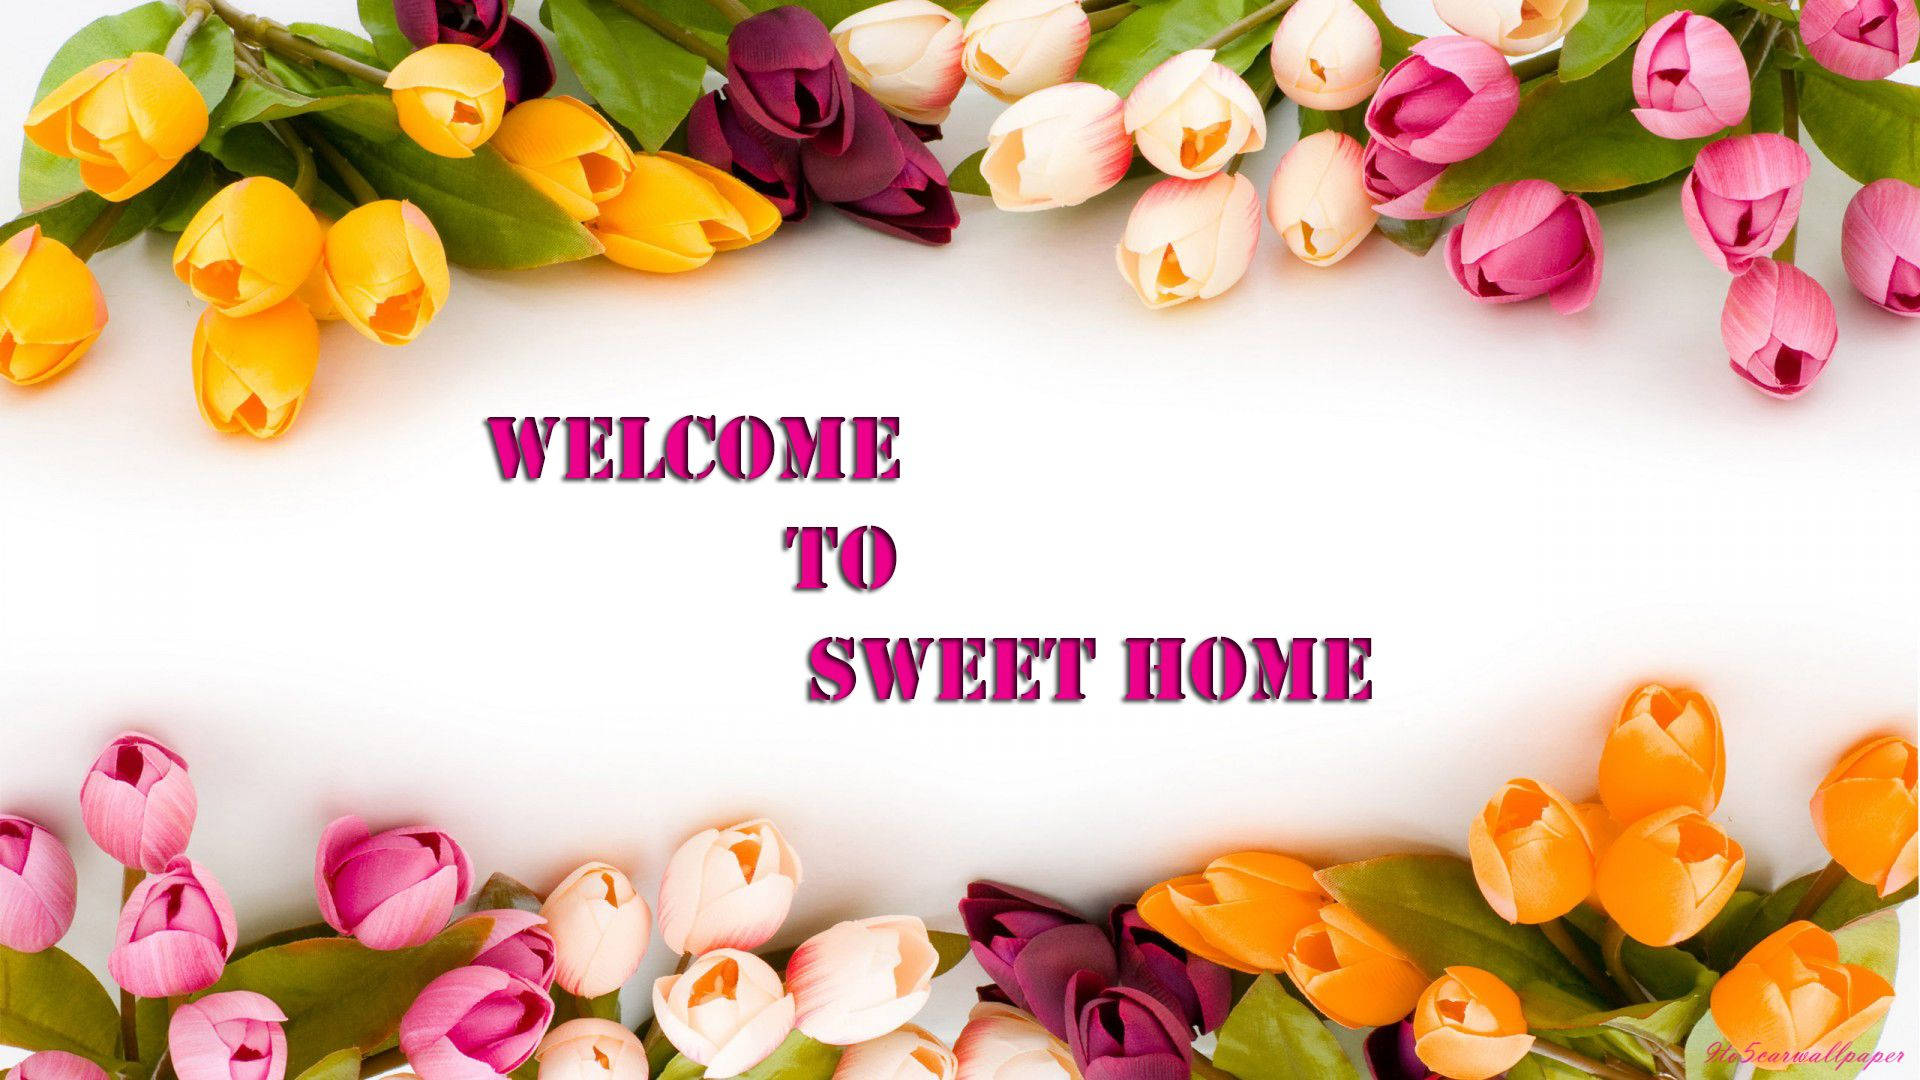 Welcome To Sweet Home Wallpaper